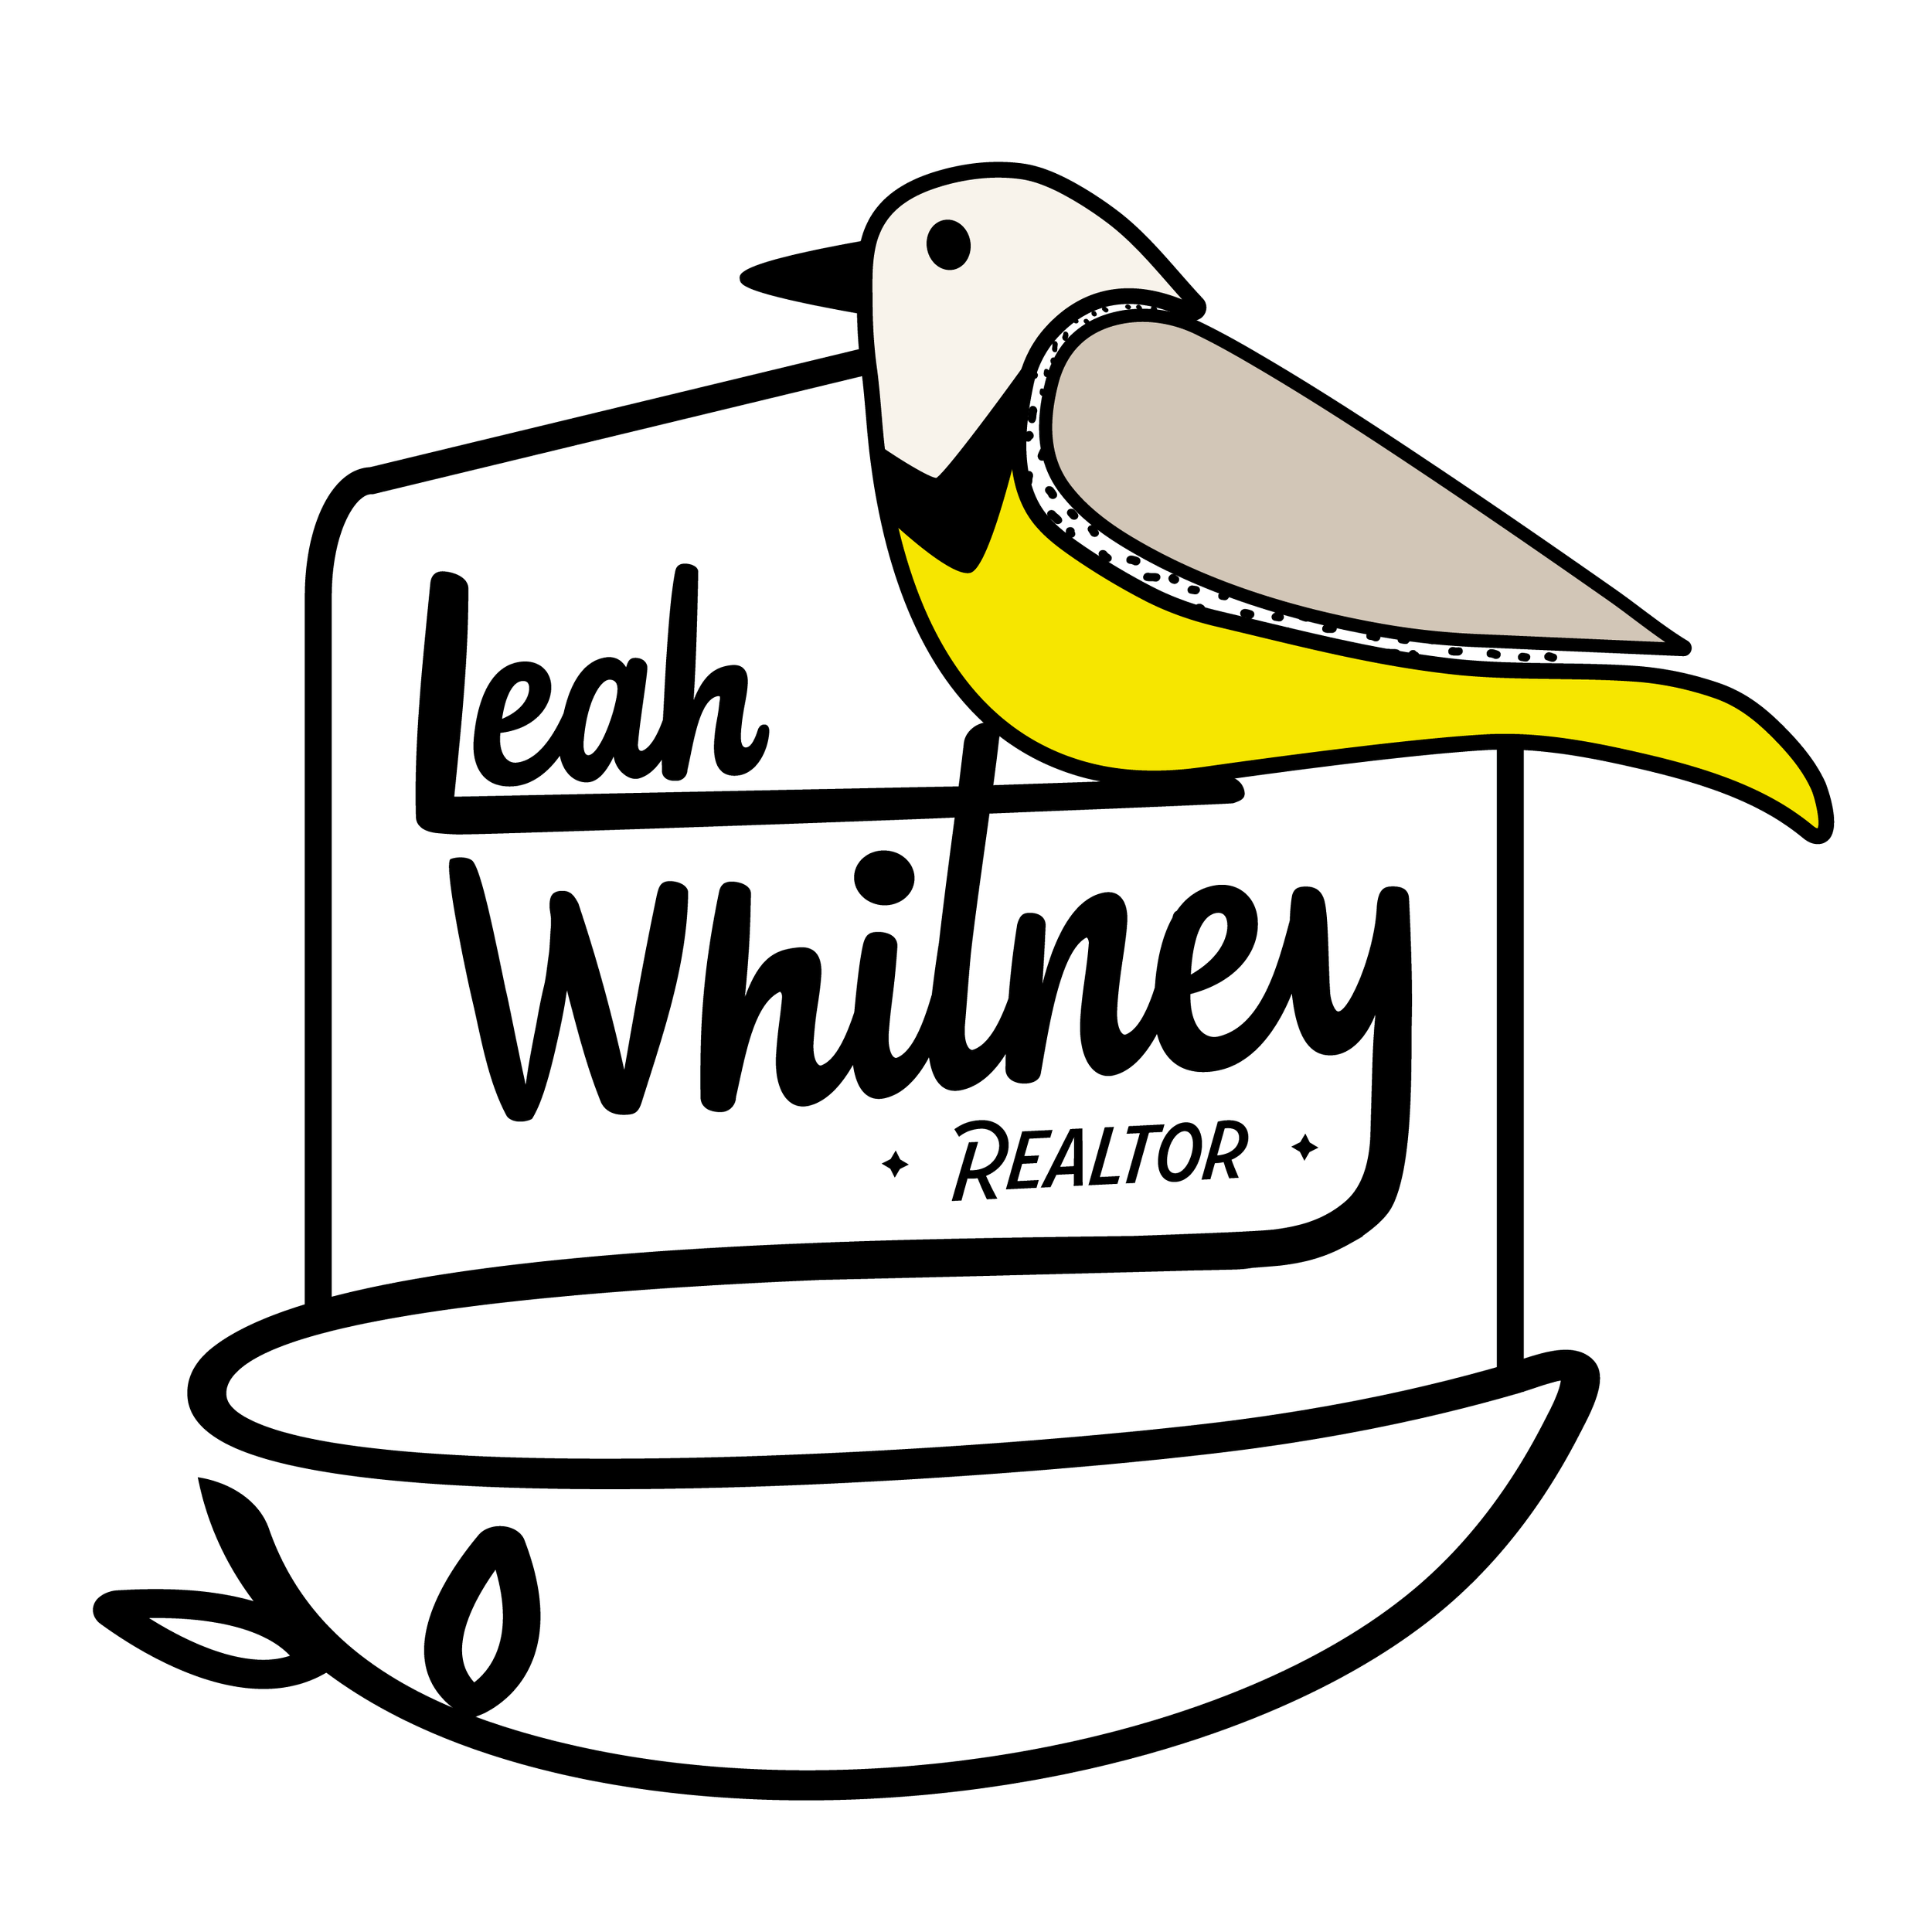 FULL LOGO - WITH NEST.png